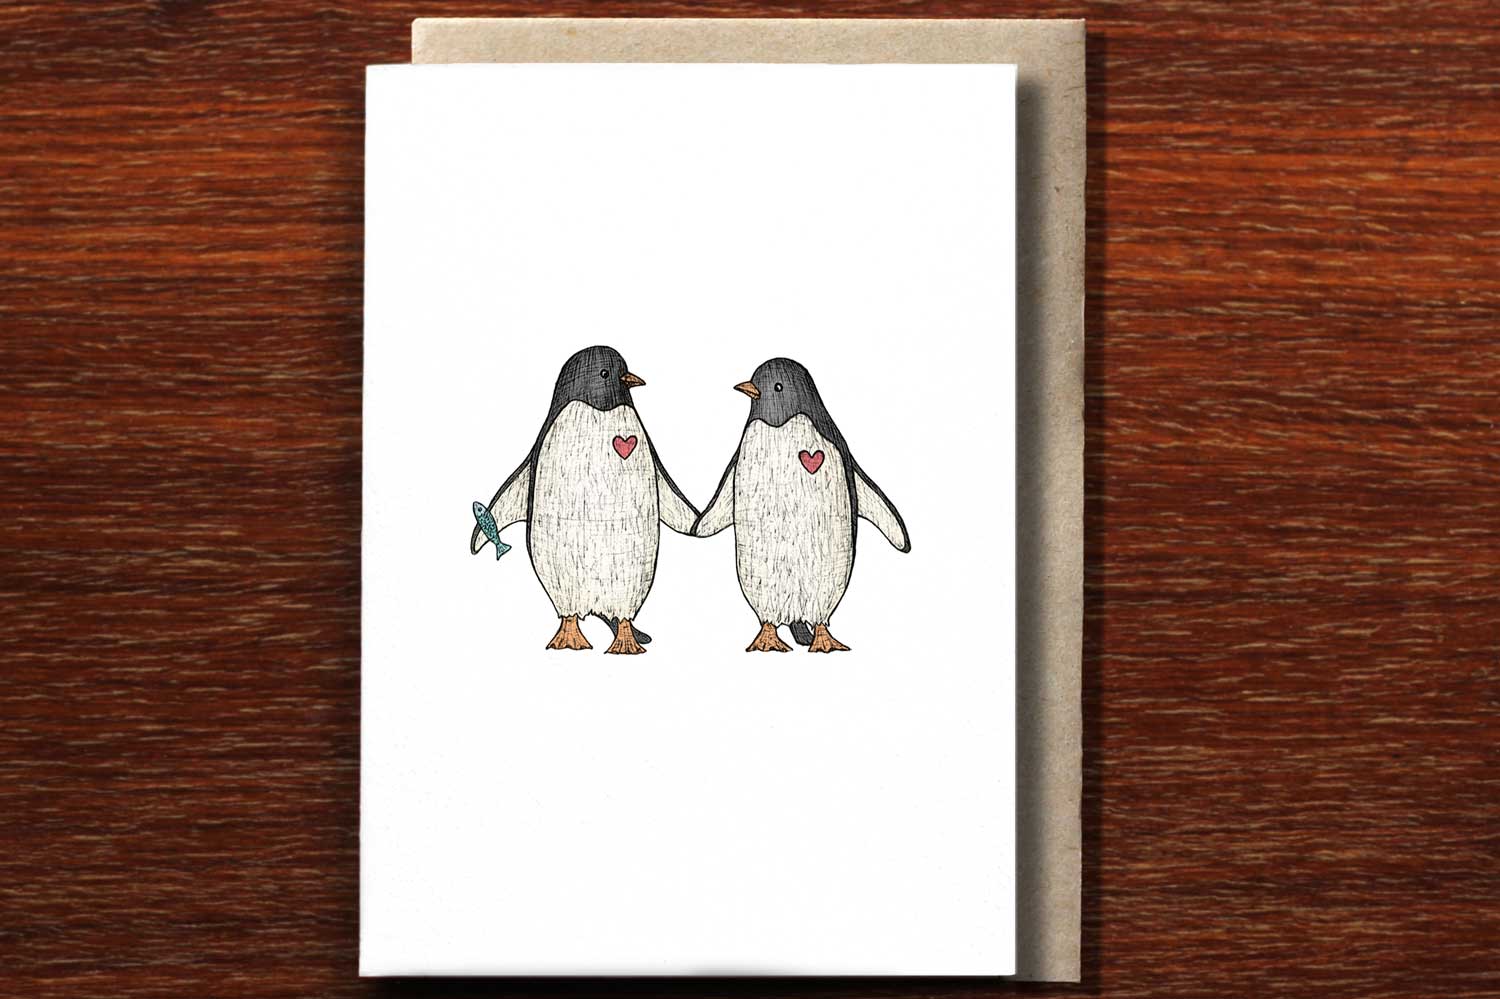 Hand illustrated wedding card with two penguins holding hands.